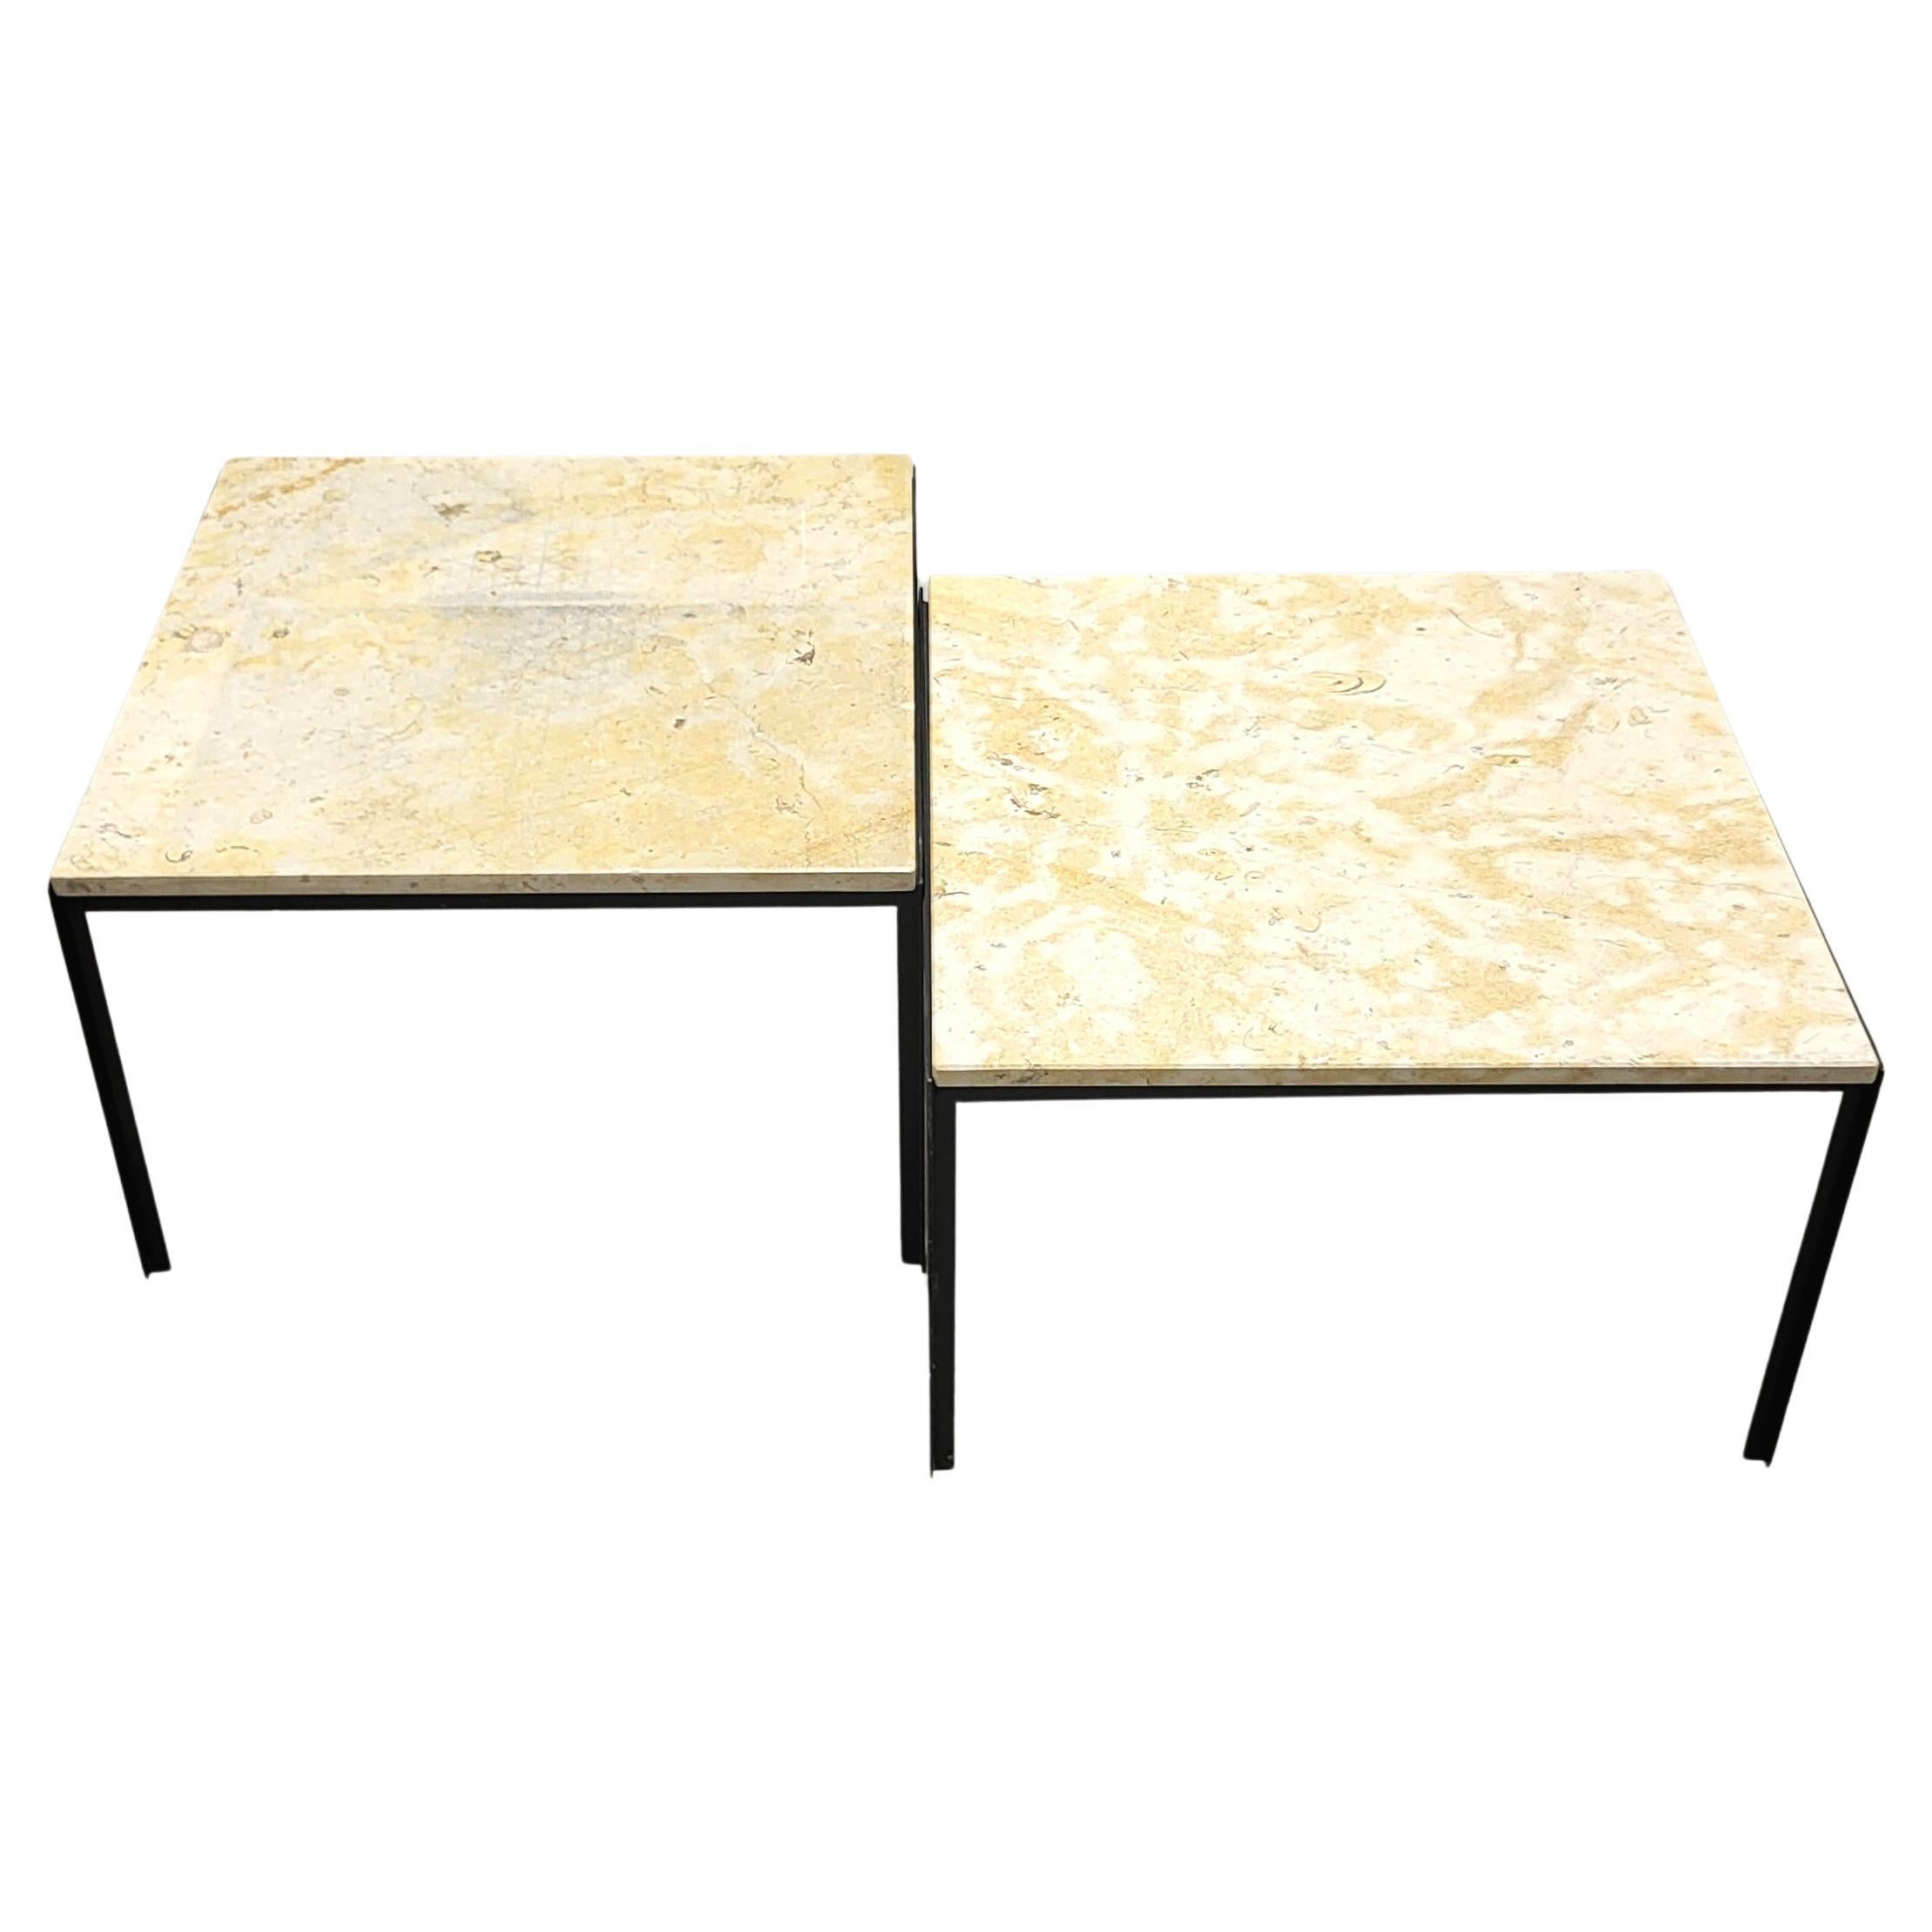 Florence Knoll T Angle Travertin Table by Knoll 1960s Set of 2